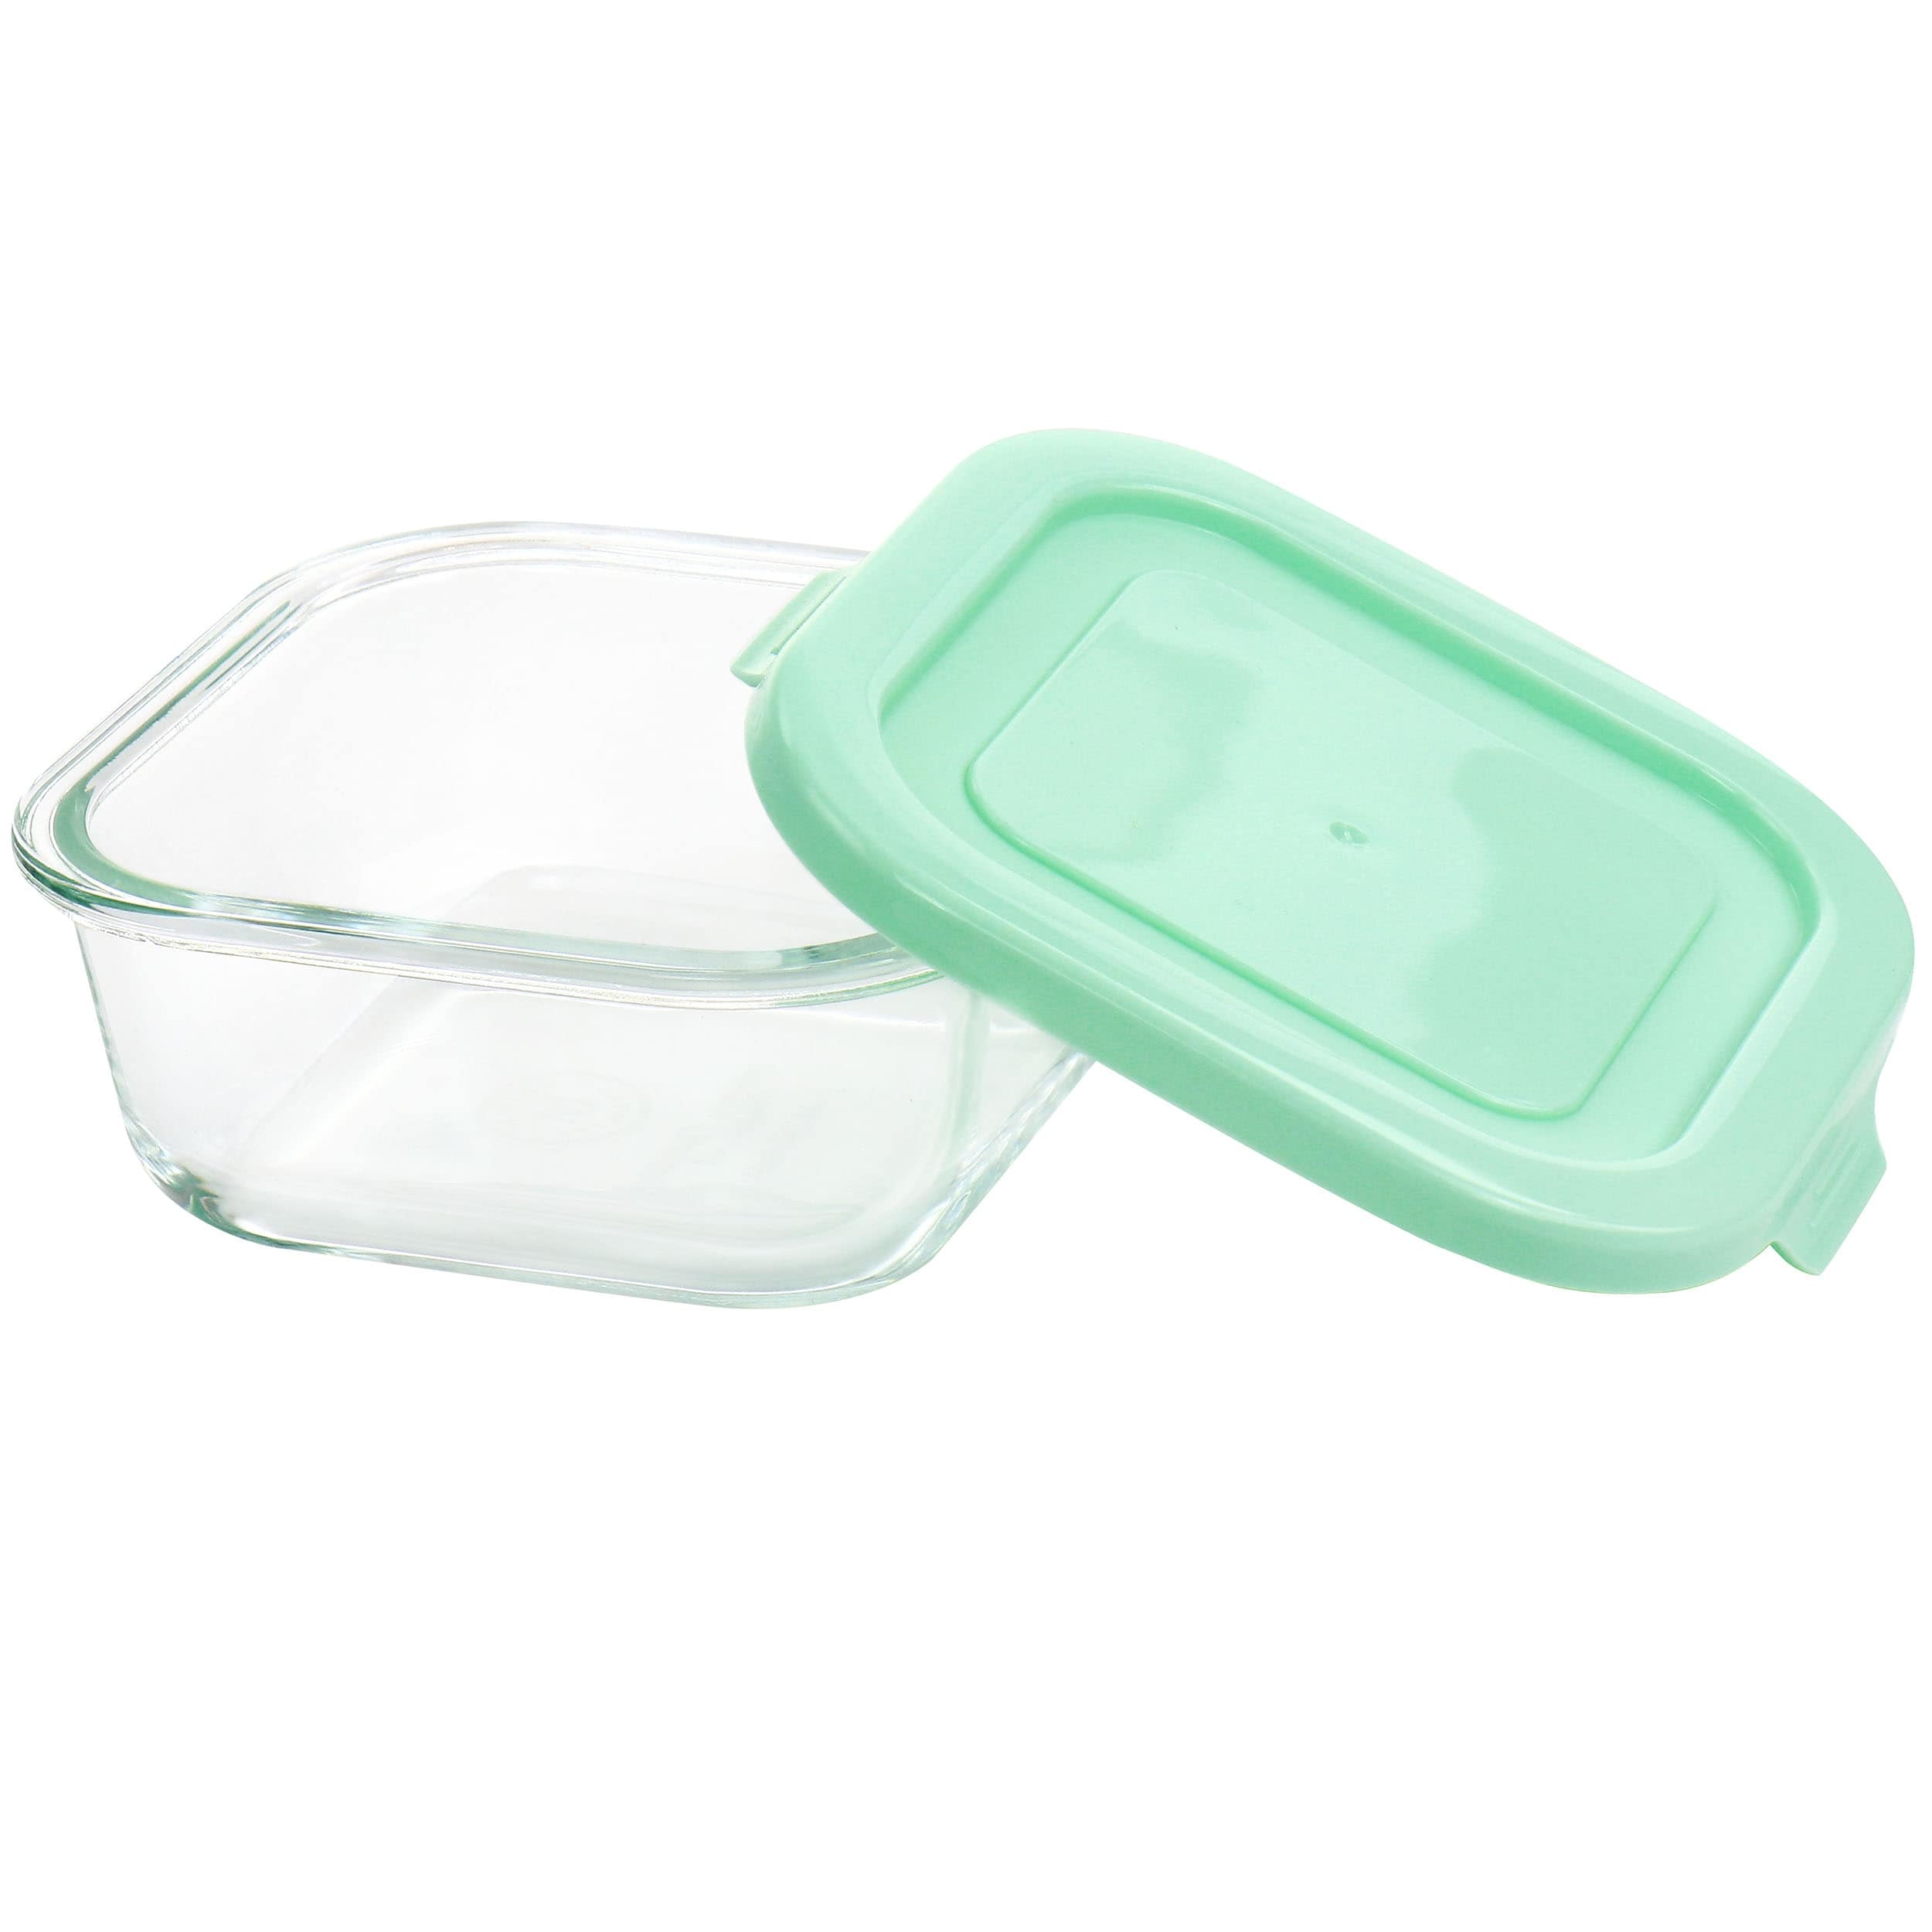 https://ak1.ostkcdn.com/images/products/is/images/direct/09d365d1759f17e4a8f49093d04ac2cd5803ab14/6-Piece-Glass-Storage-Containers-with-Lids-in-Mint.jpg